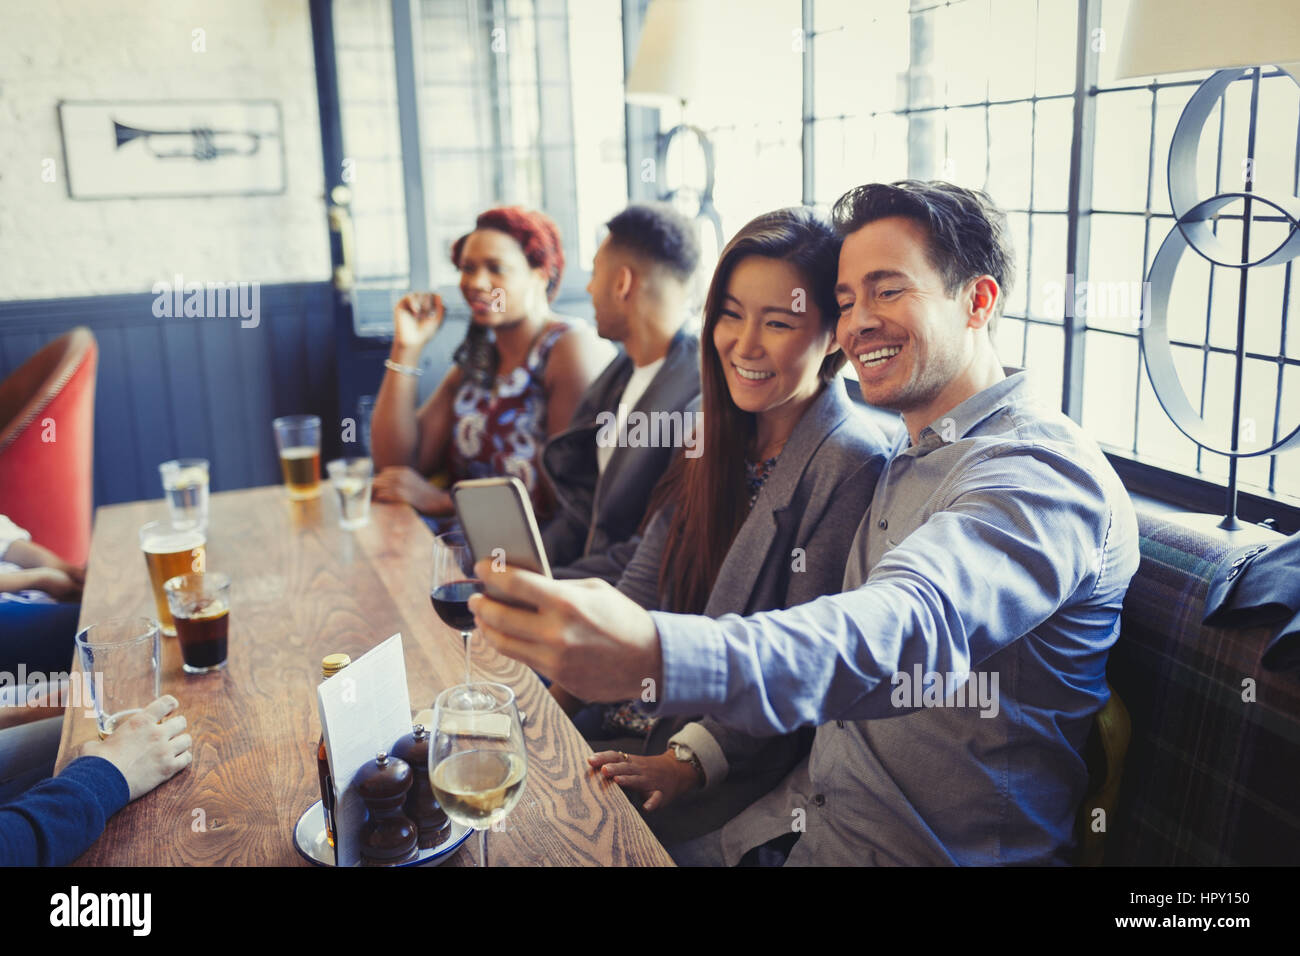 Smiling couple taking selfie with camera phone at table in bar Stock Photo